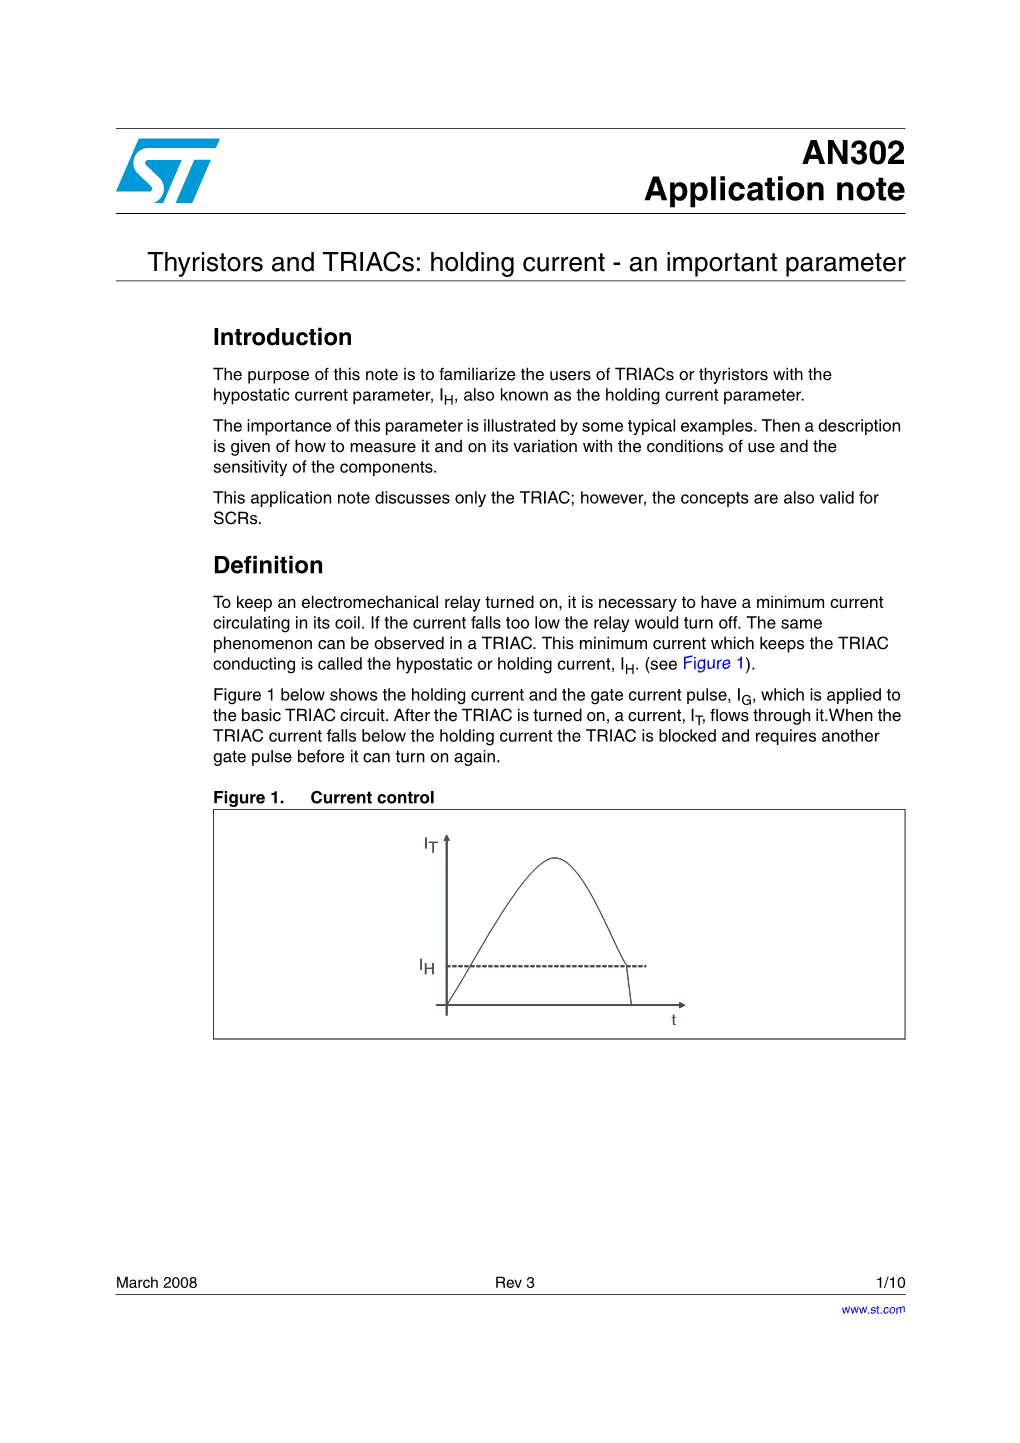 Thyristors and Triacs: Holding Current - an Important Parameter